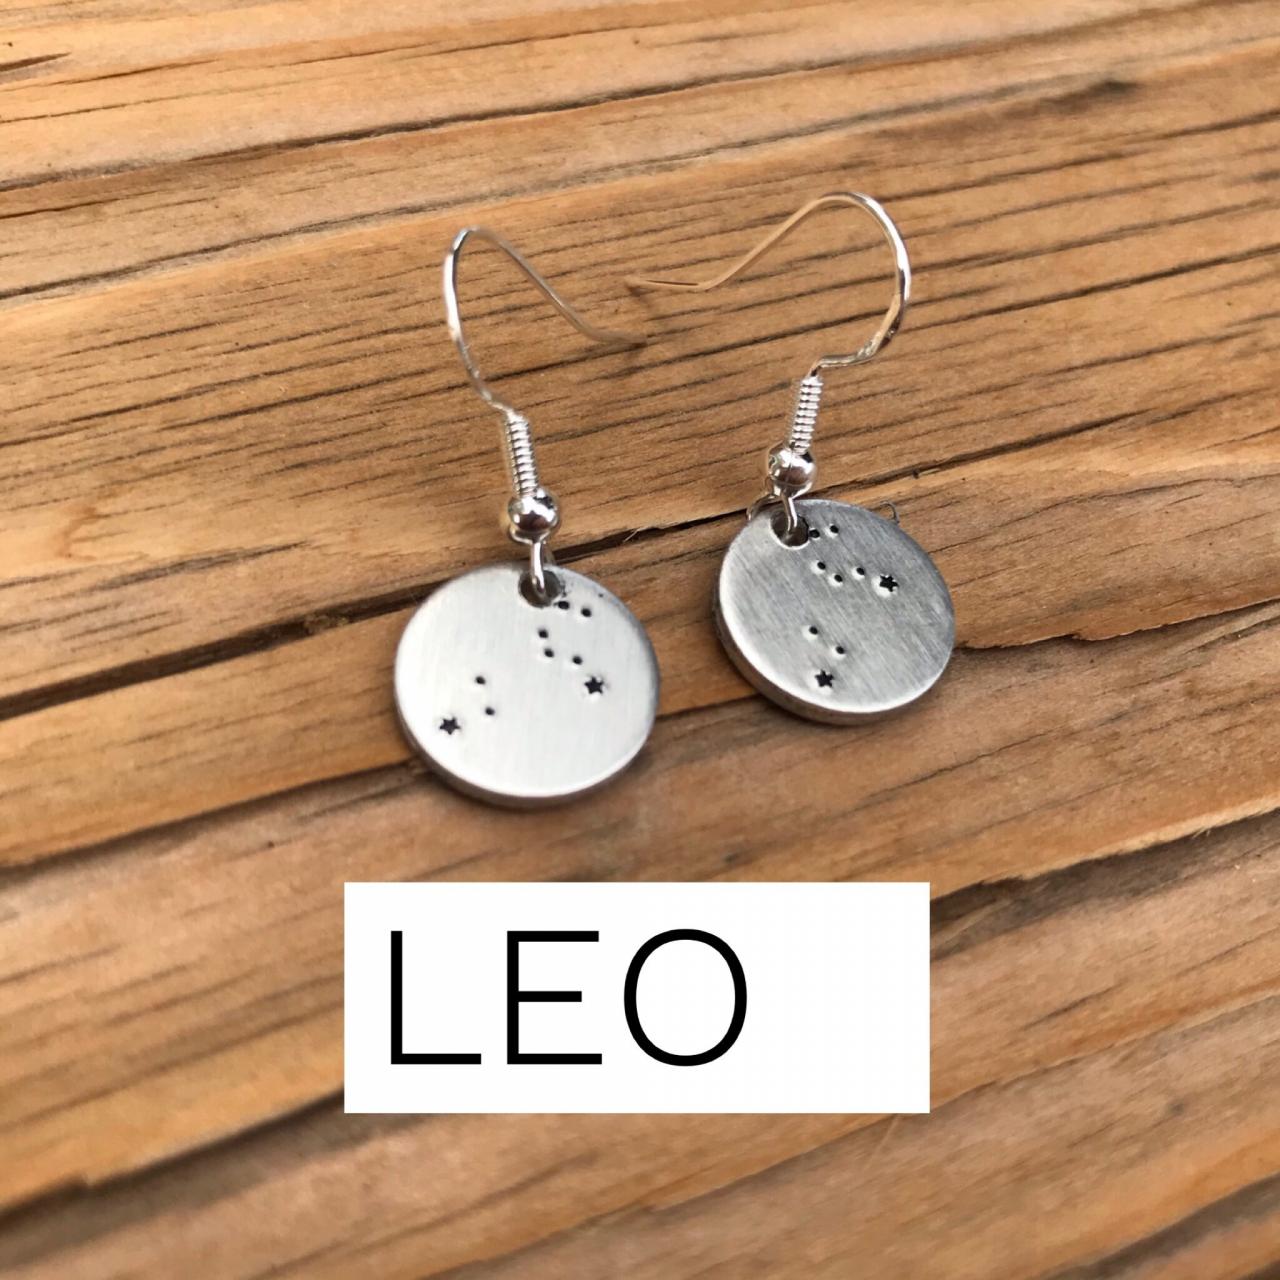 Earrings,leo, Zodiac, Constellation, Earrings, Witchy, Silver, Stars, Star, Rising, Sun, Moon, Star Sign, Zodiac Sign, Sun Sign, Rising Sign